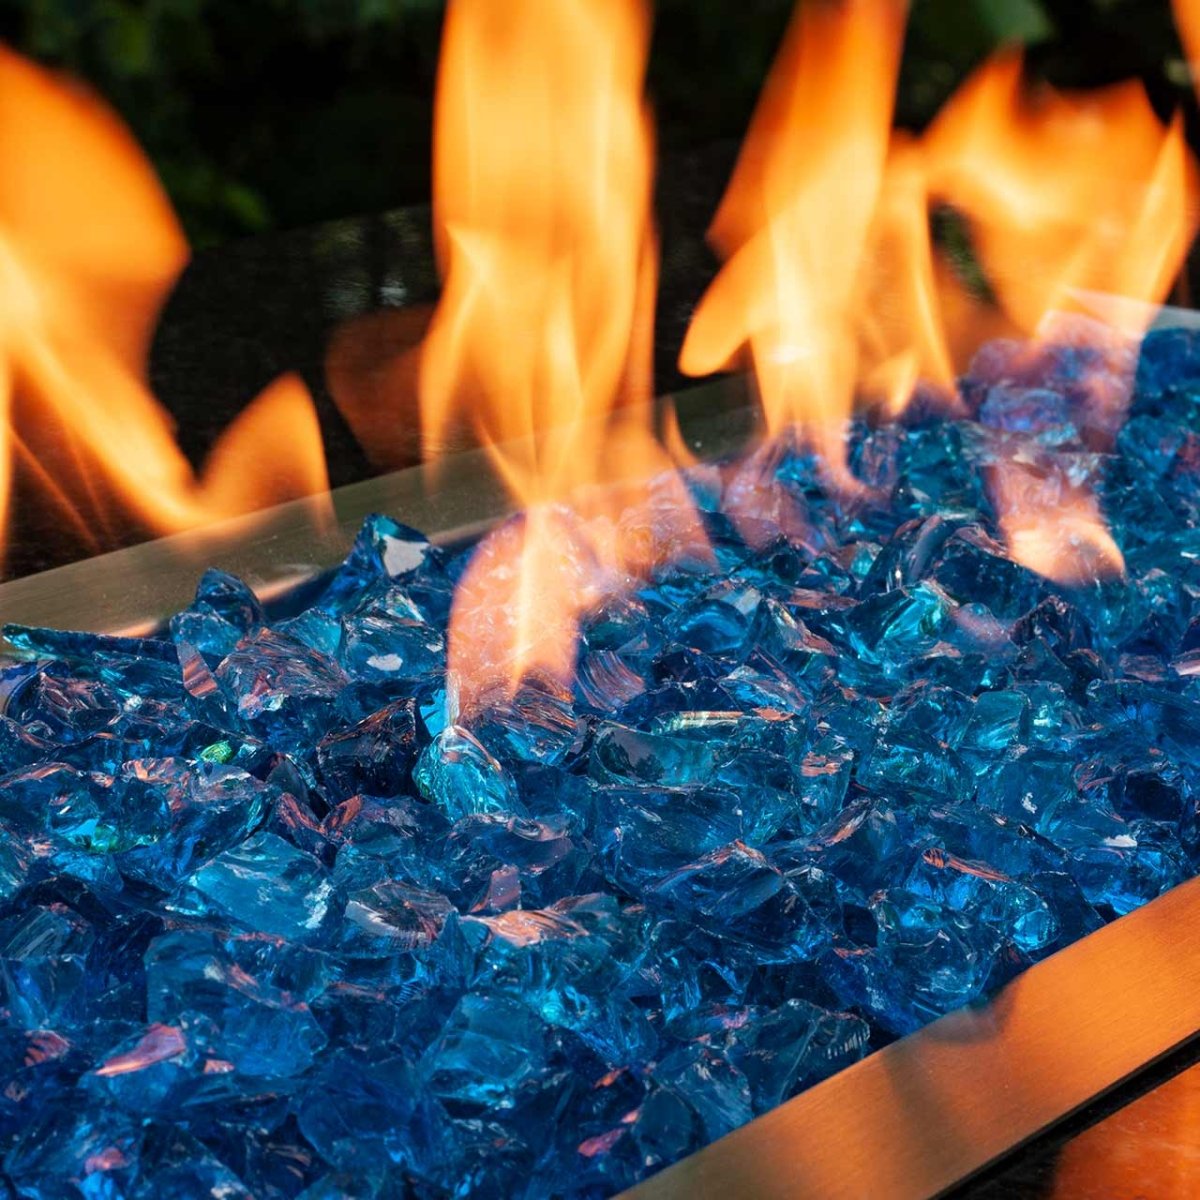 Crystal Blue Fire Glass - American Specialty Glass